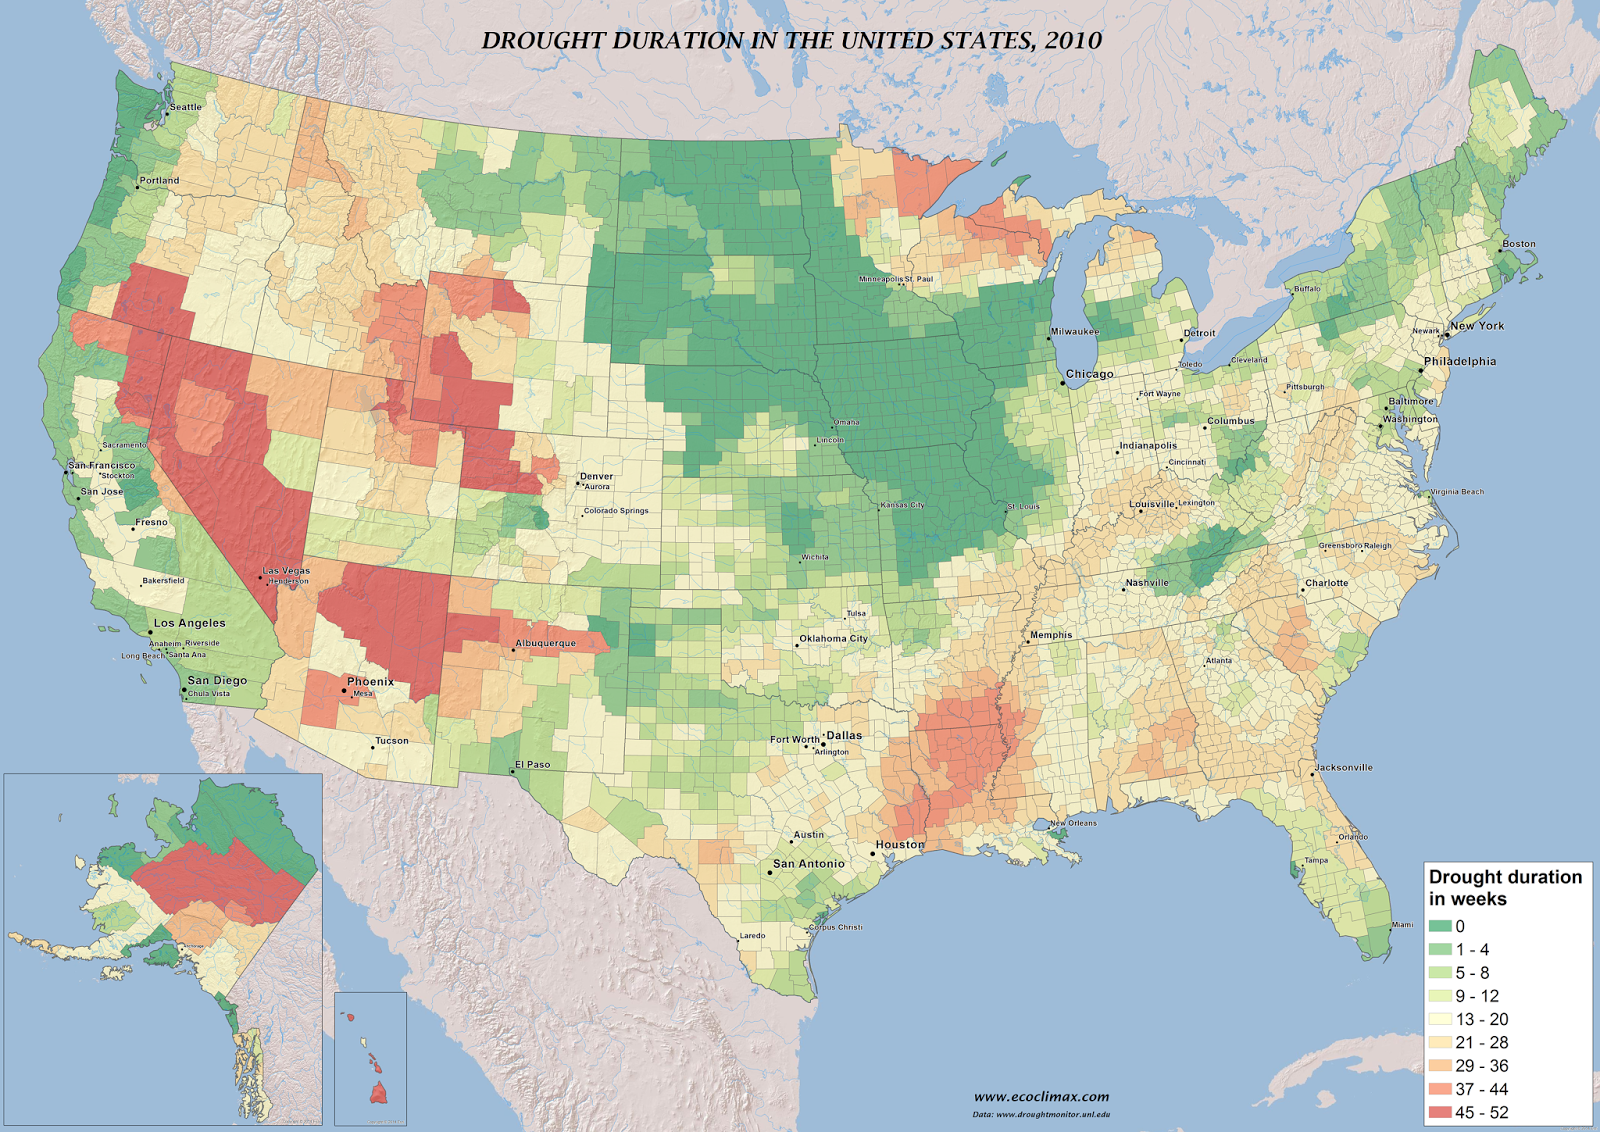 Drought duration in the United States (2010)